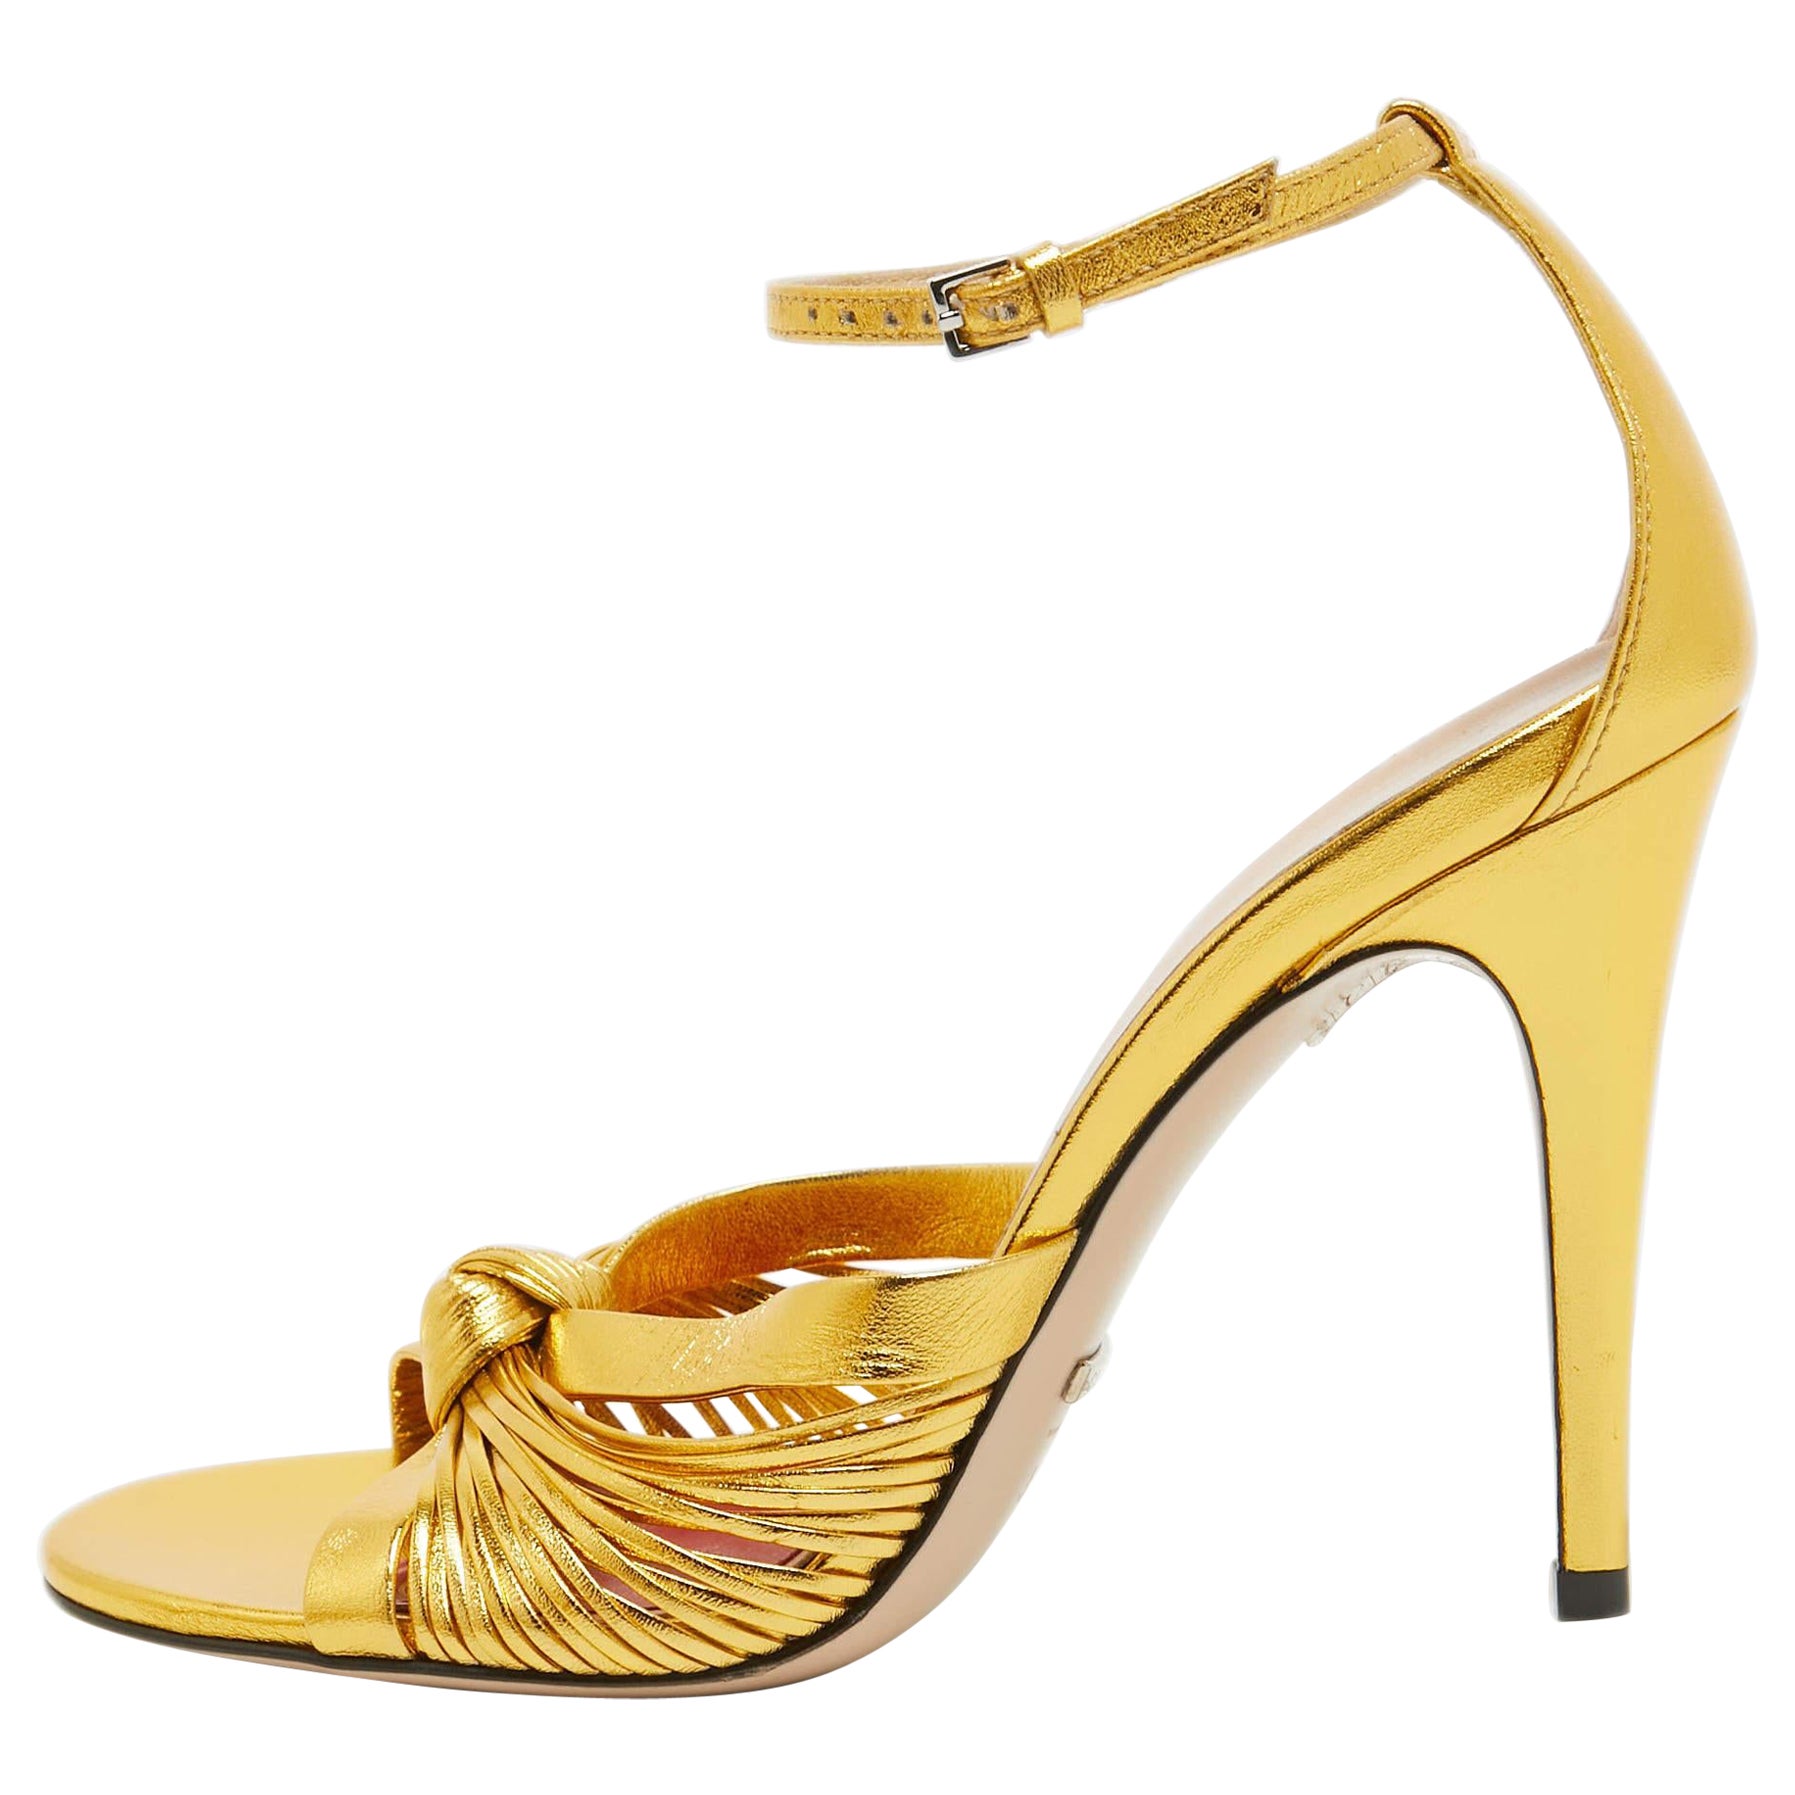 Gucci Metallic Gold Leather Allie Ankle Strap Sandals Size 38.5